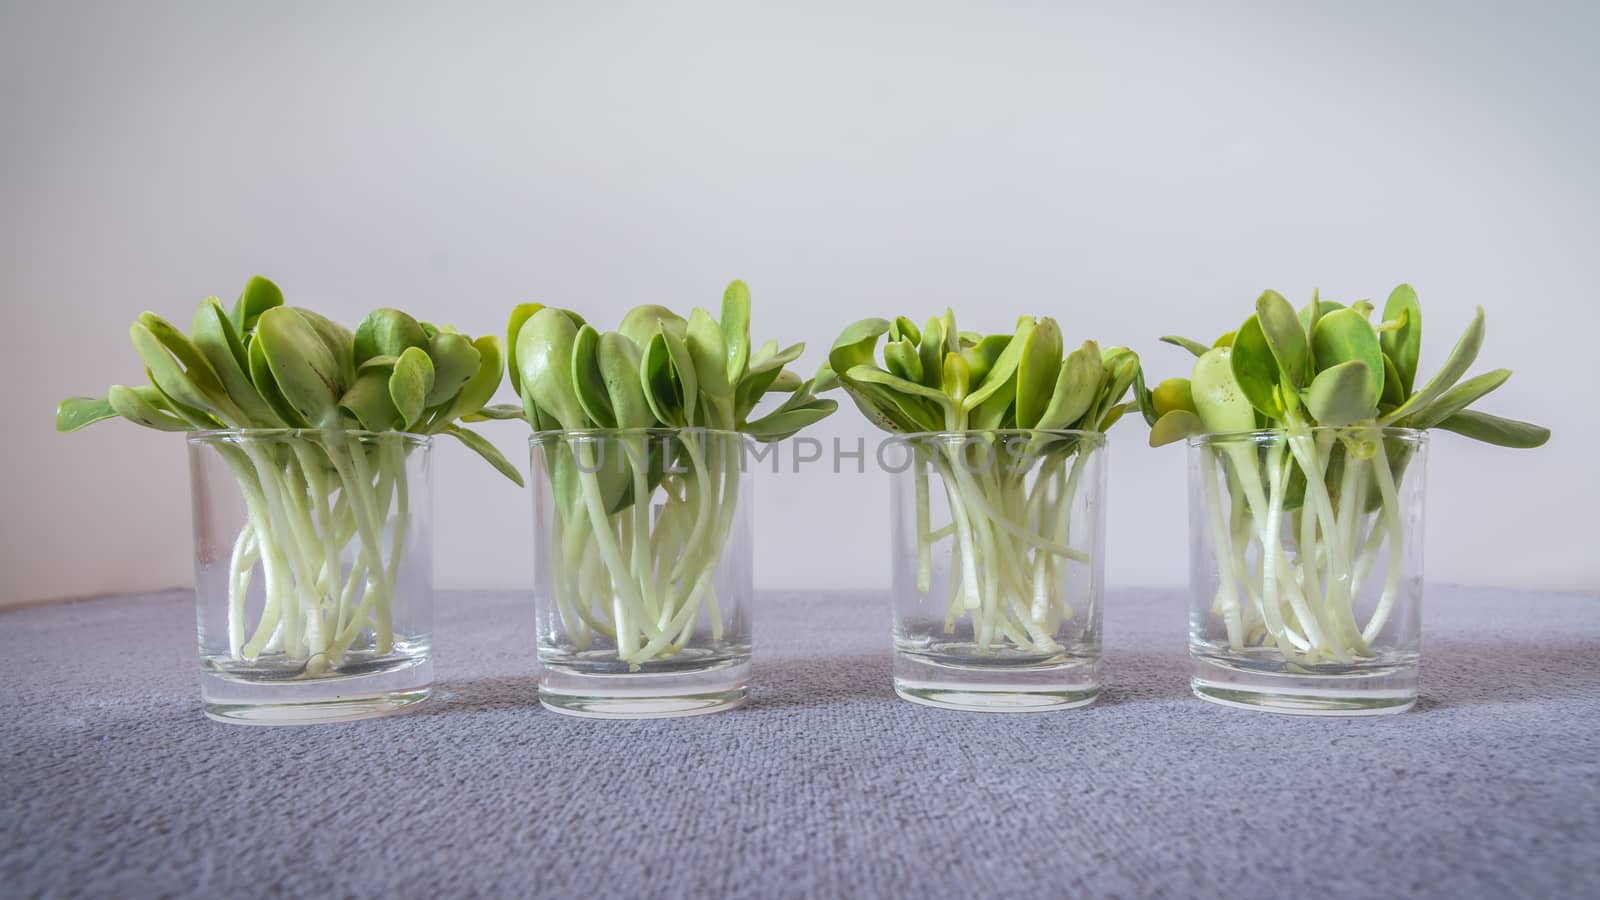 Sunflower sprouts in a cup by matter77